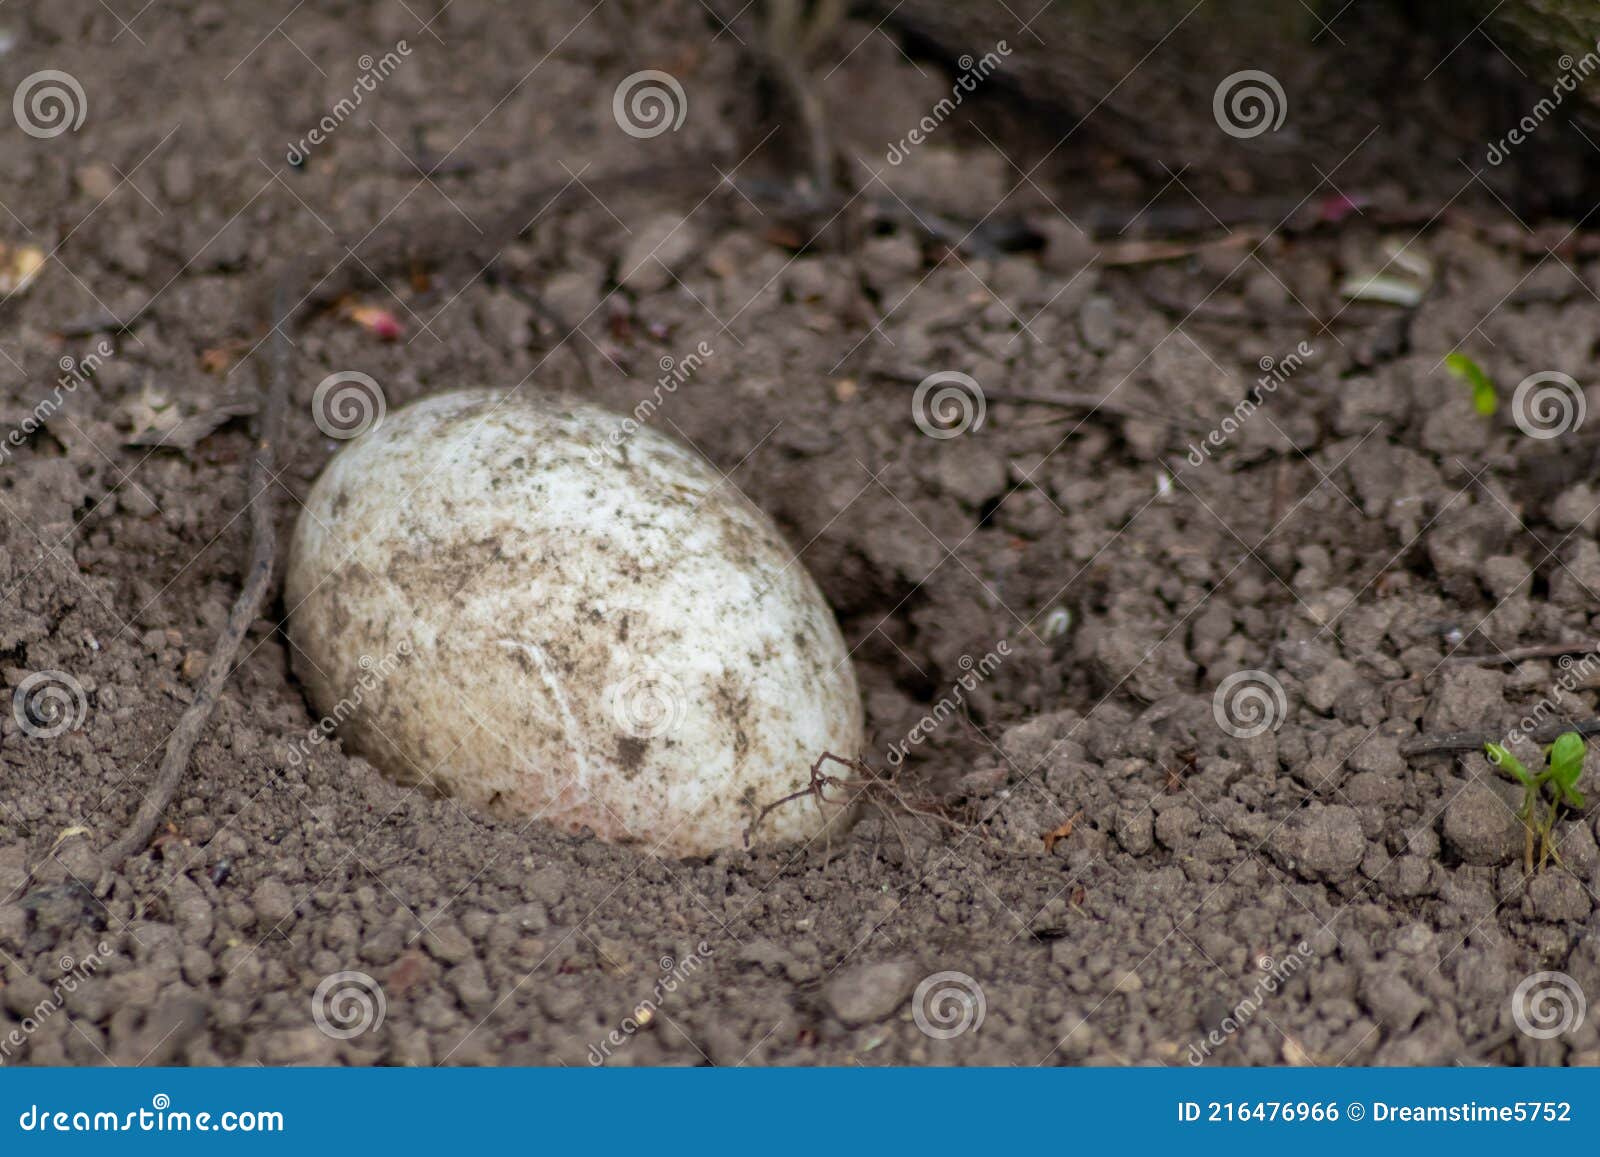 single sprinkled egg in a sand hole for incubation or breeding in sand of reptiles and coldblooded animals like crocodiles